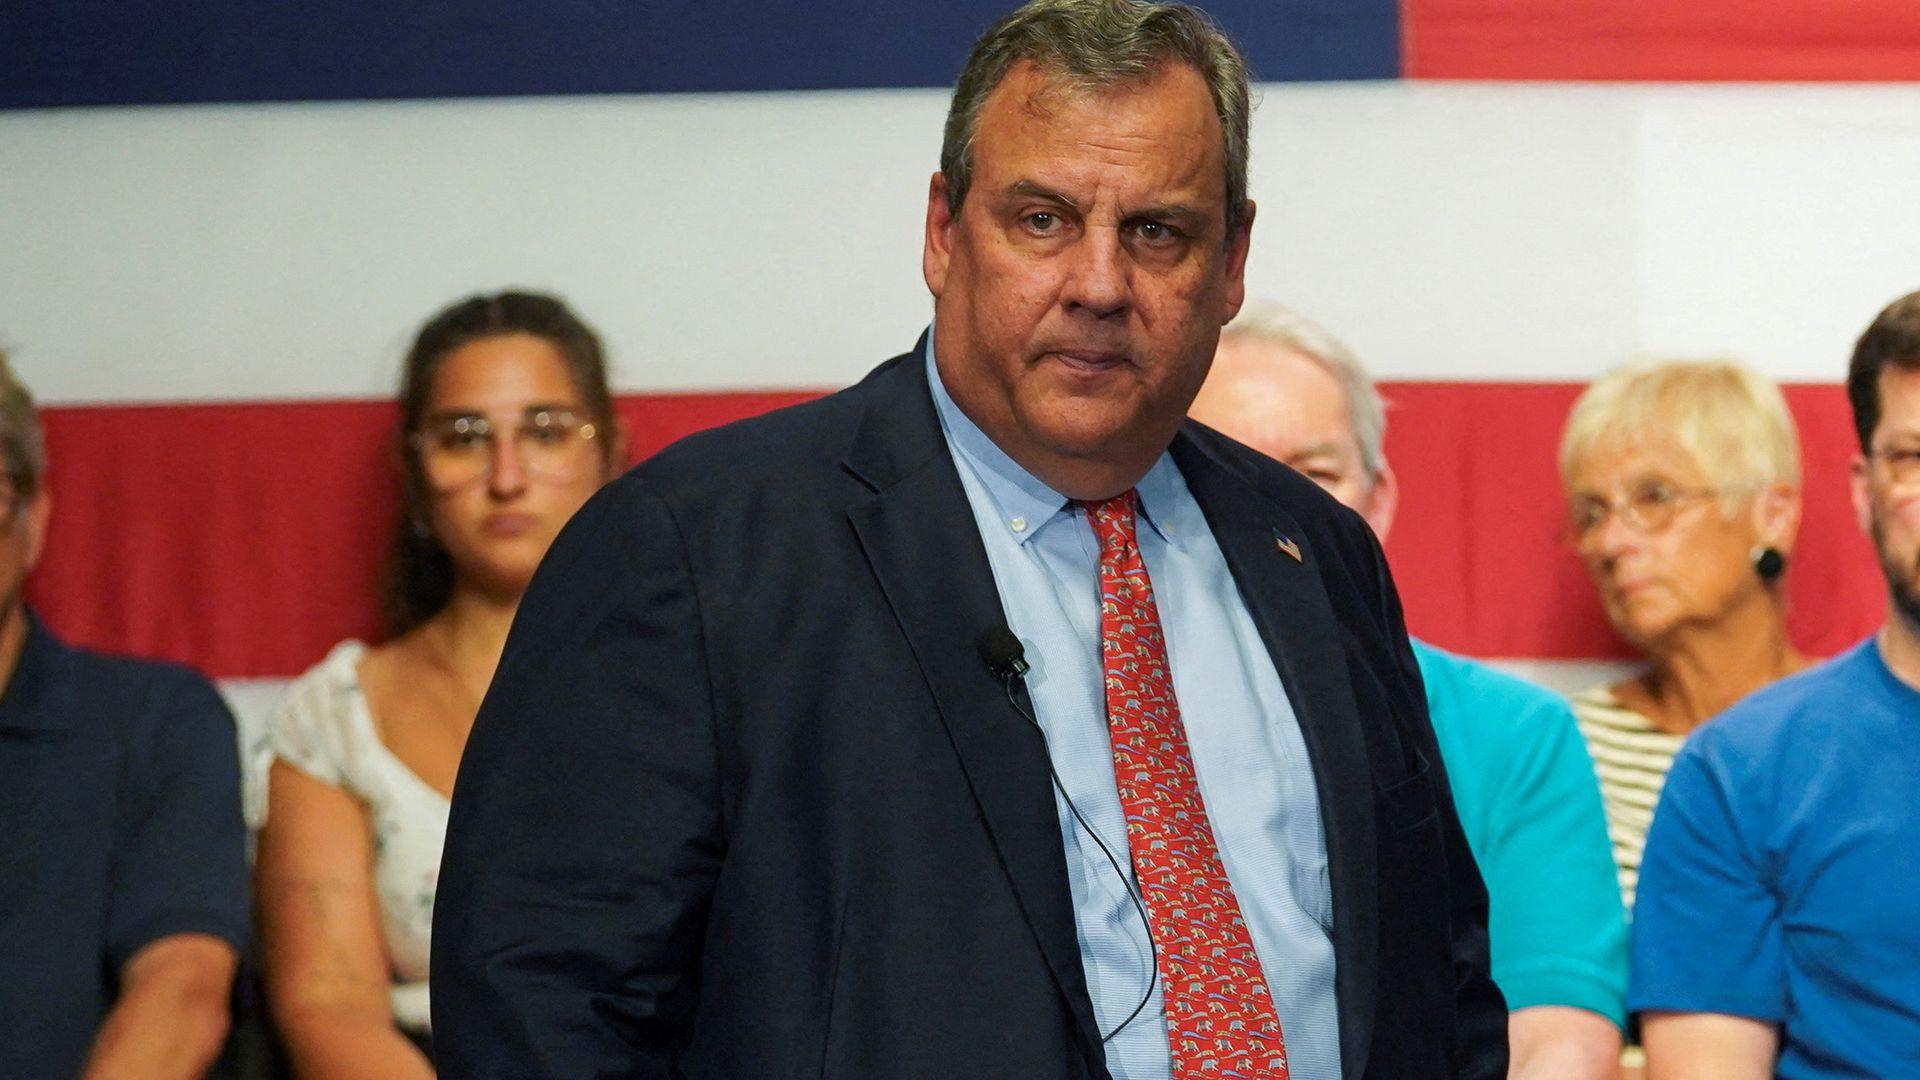 Former Gov. Chris Christie failed to obtain the required 2,000 signatures from Maine voters to appear on the state's GOP primary ballot.